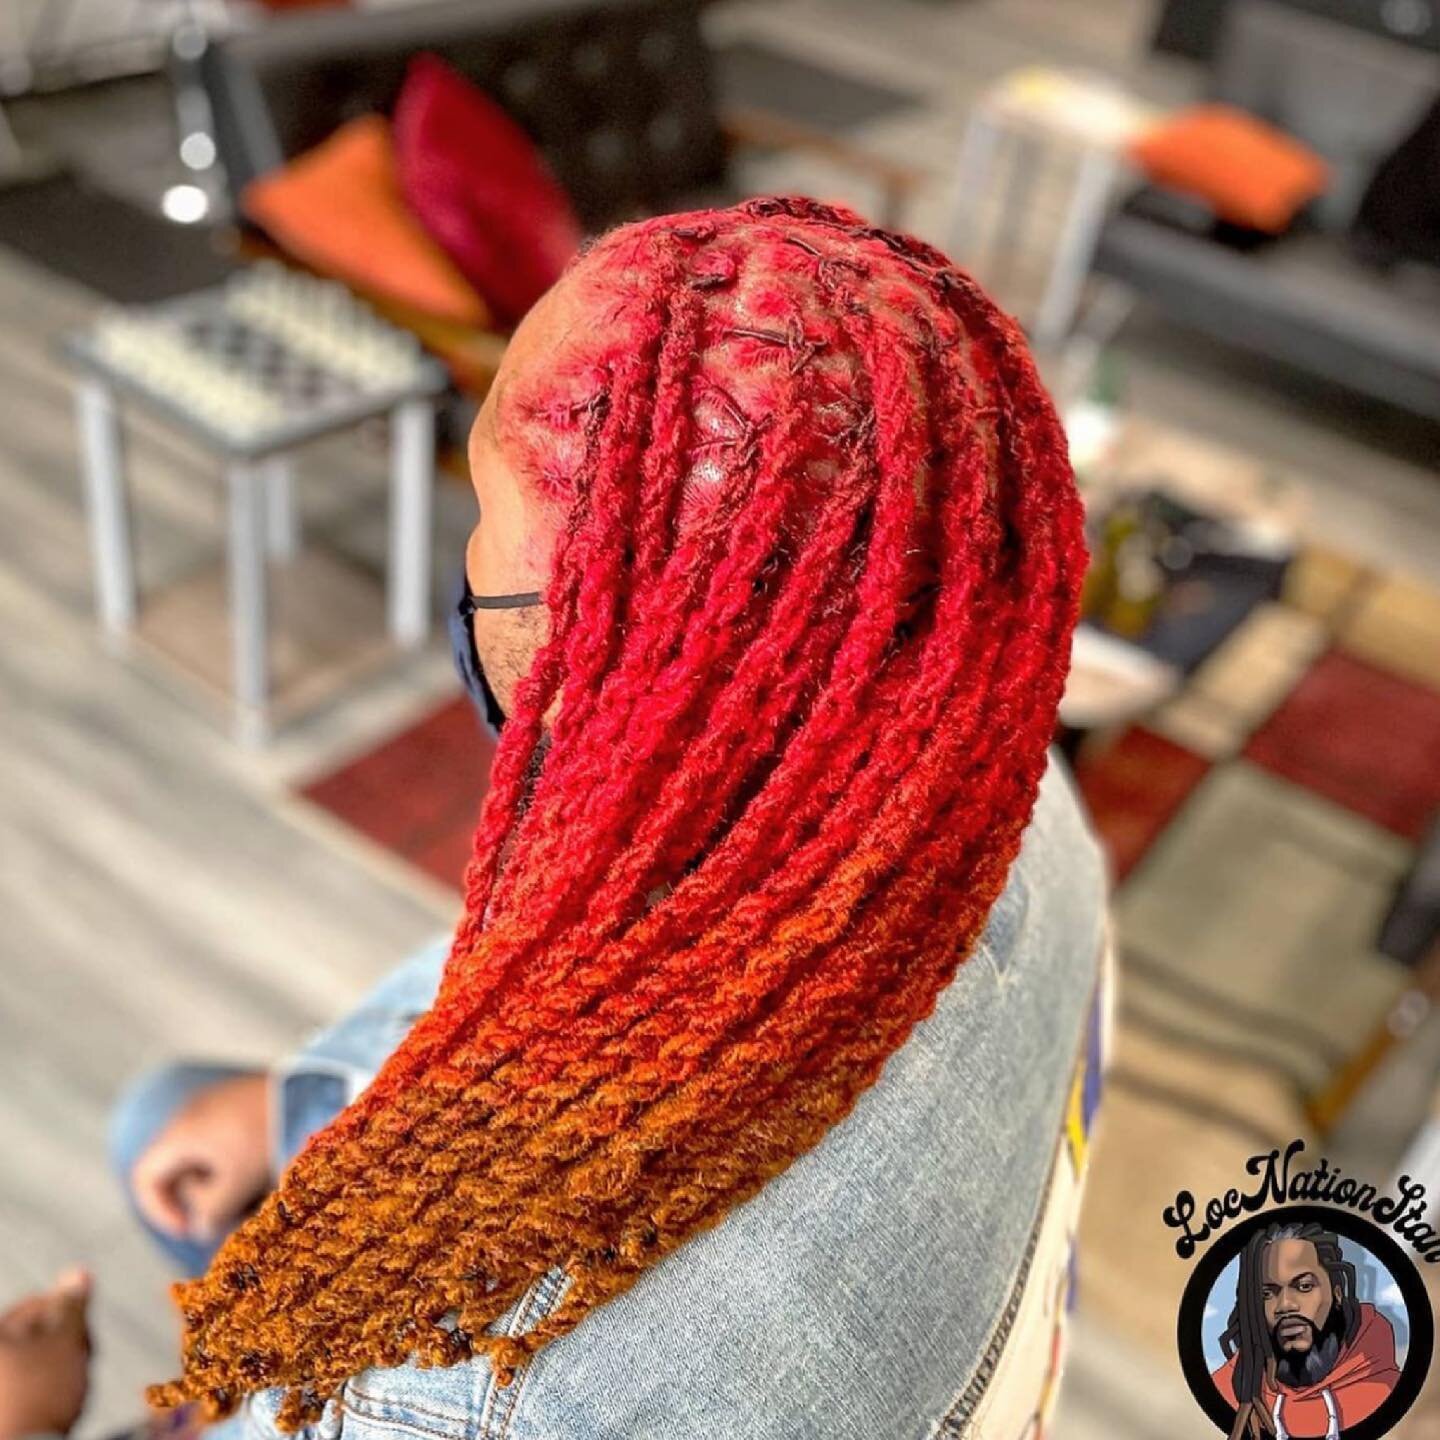 When that red pops out!!!
&bull;
Tag someone who has dope locs!!
&bull;
Make sure you book your next appointment with @locnationstan only at @locnationhairsalon ..
&bull;
Tap link in bio..
&bull;
#blackgirls #divine #king #queen #natural #naturalhair